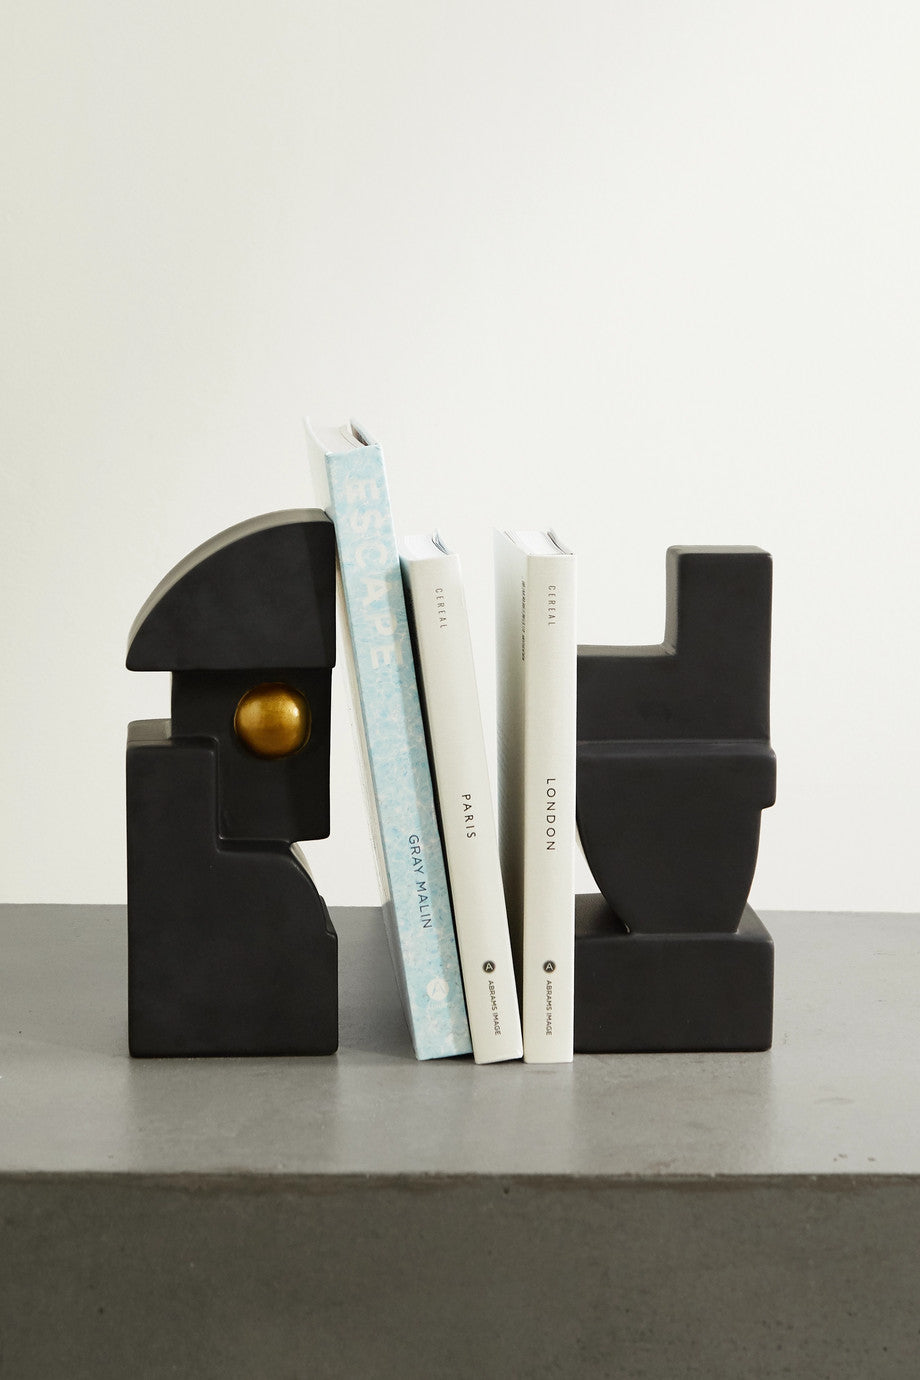 Cubisme Bookend One